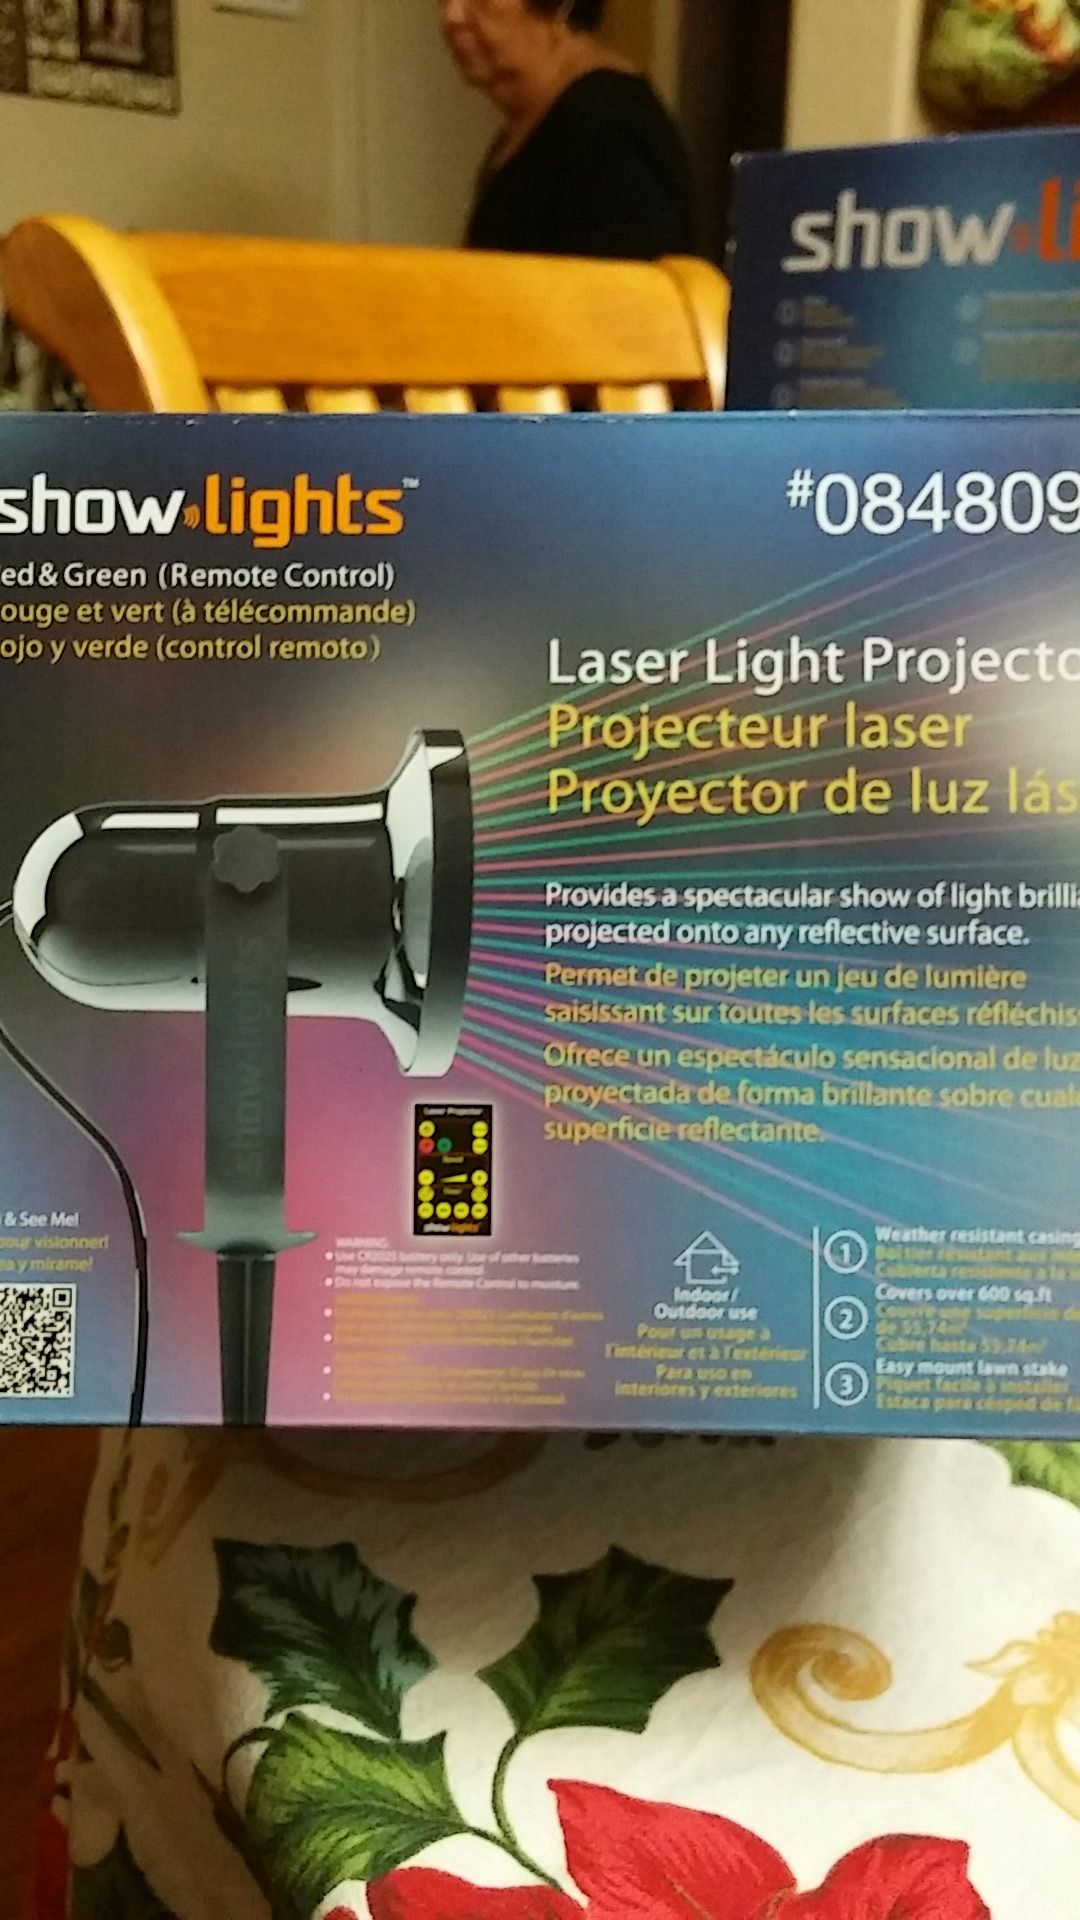 Laser light projector with remote control